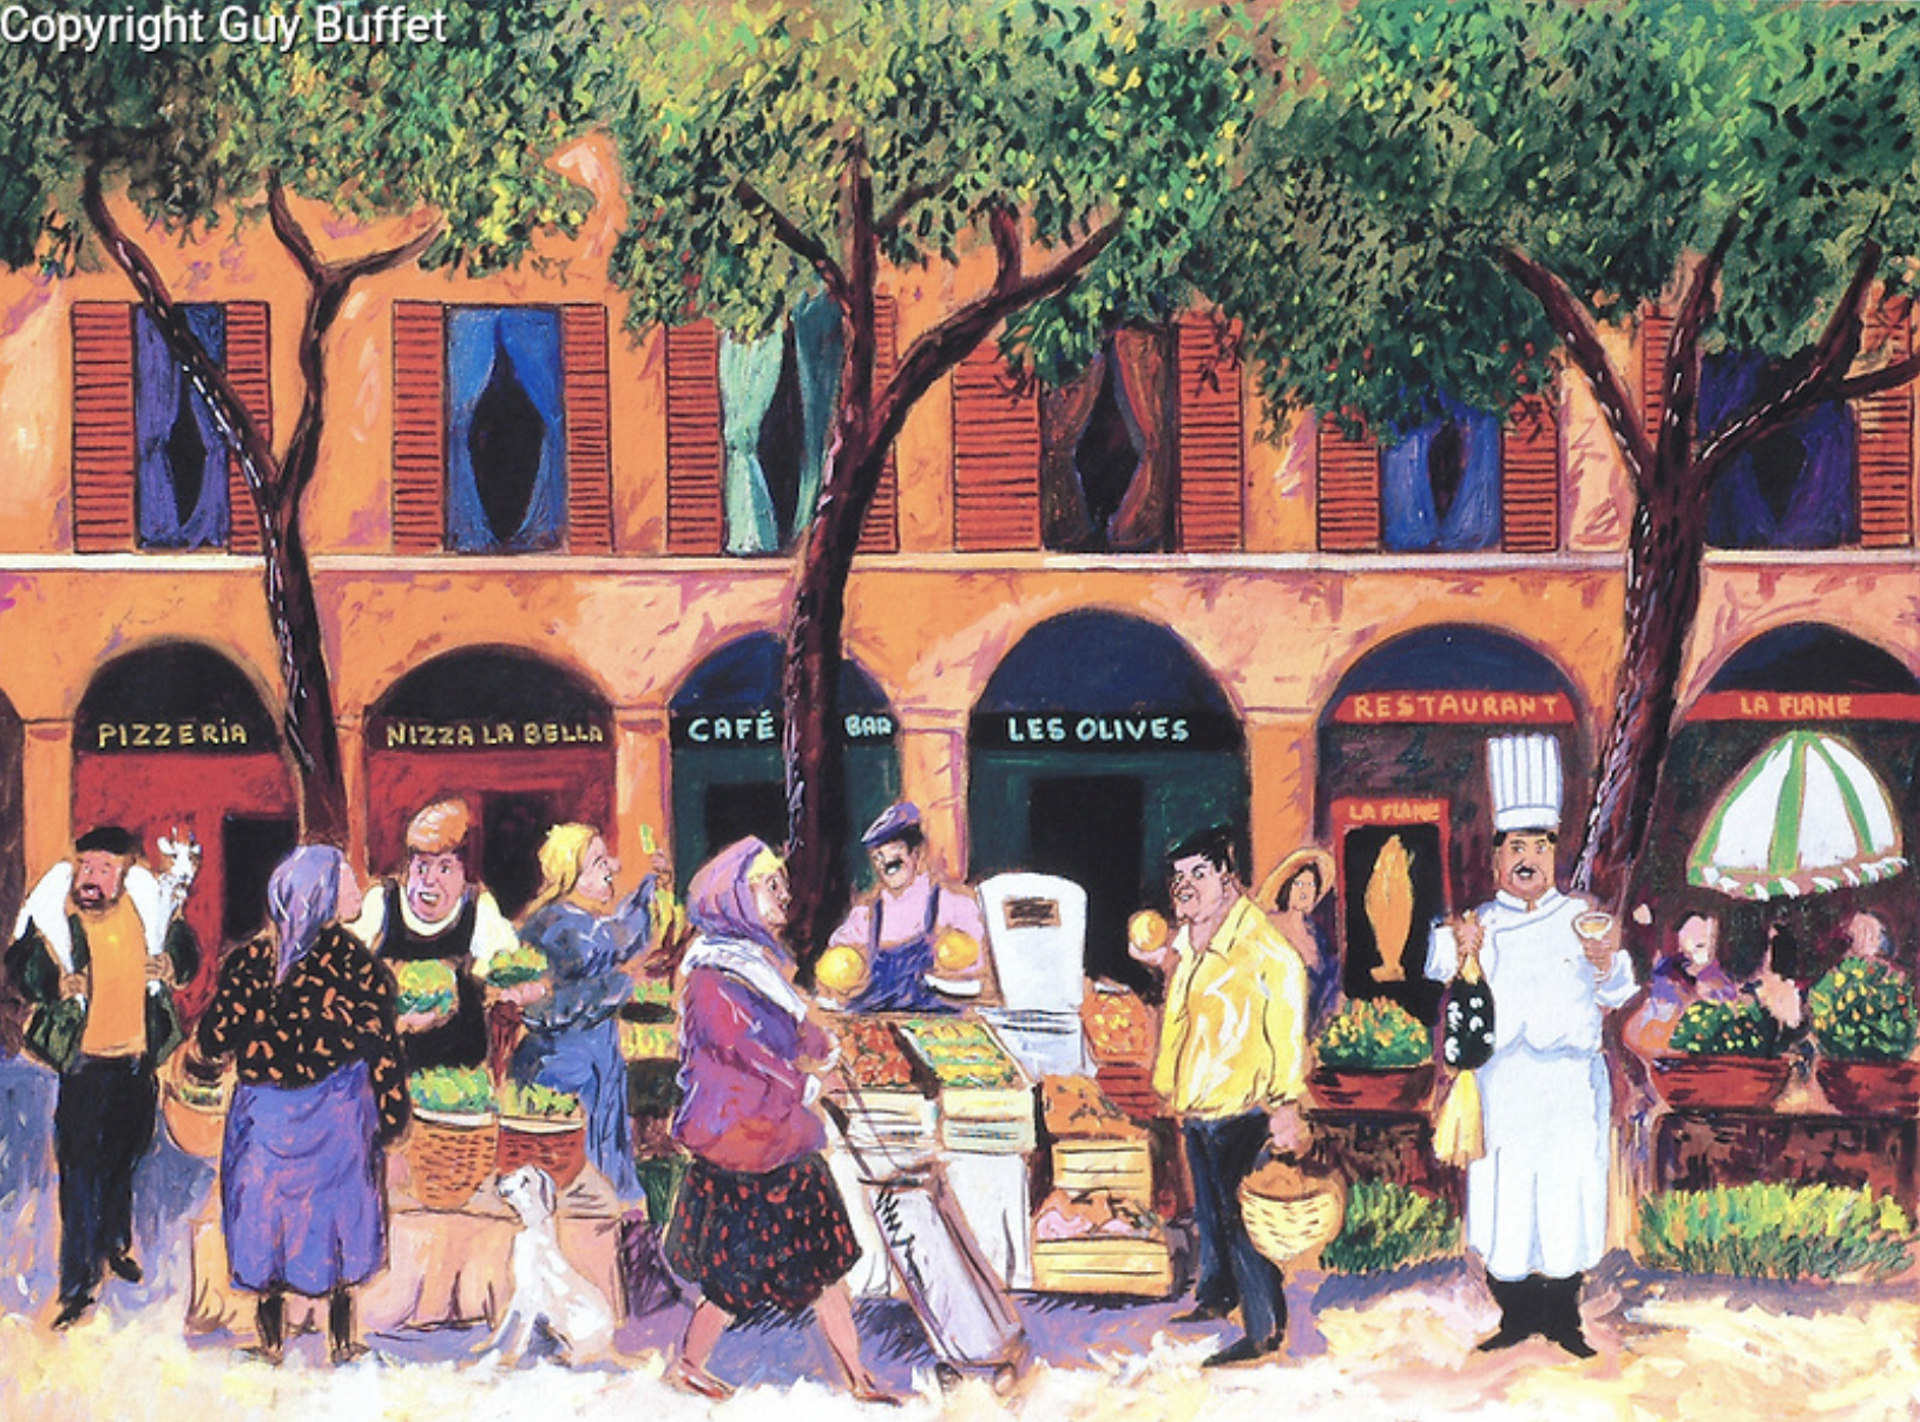 Market In Provence by Guy Buffet